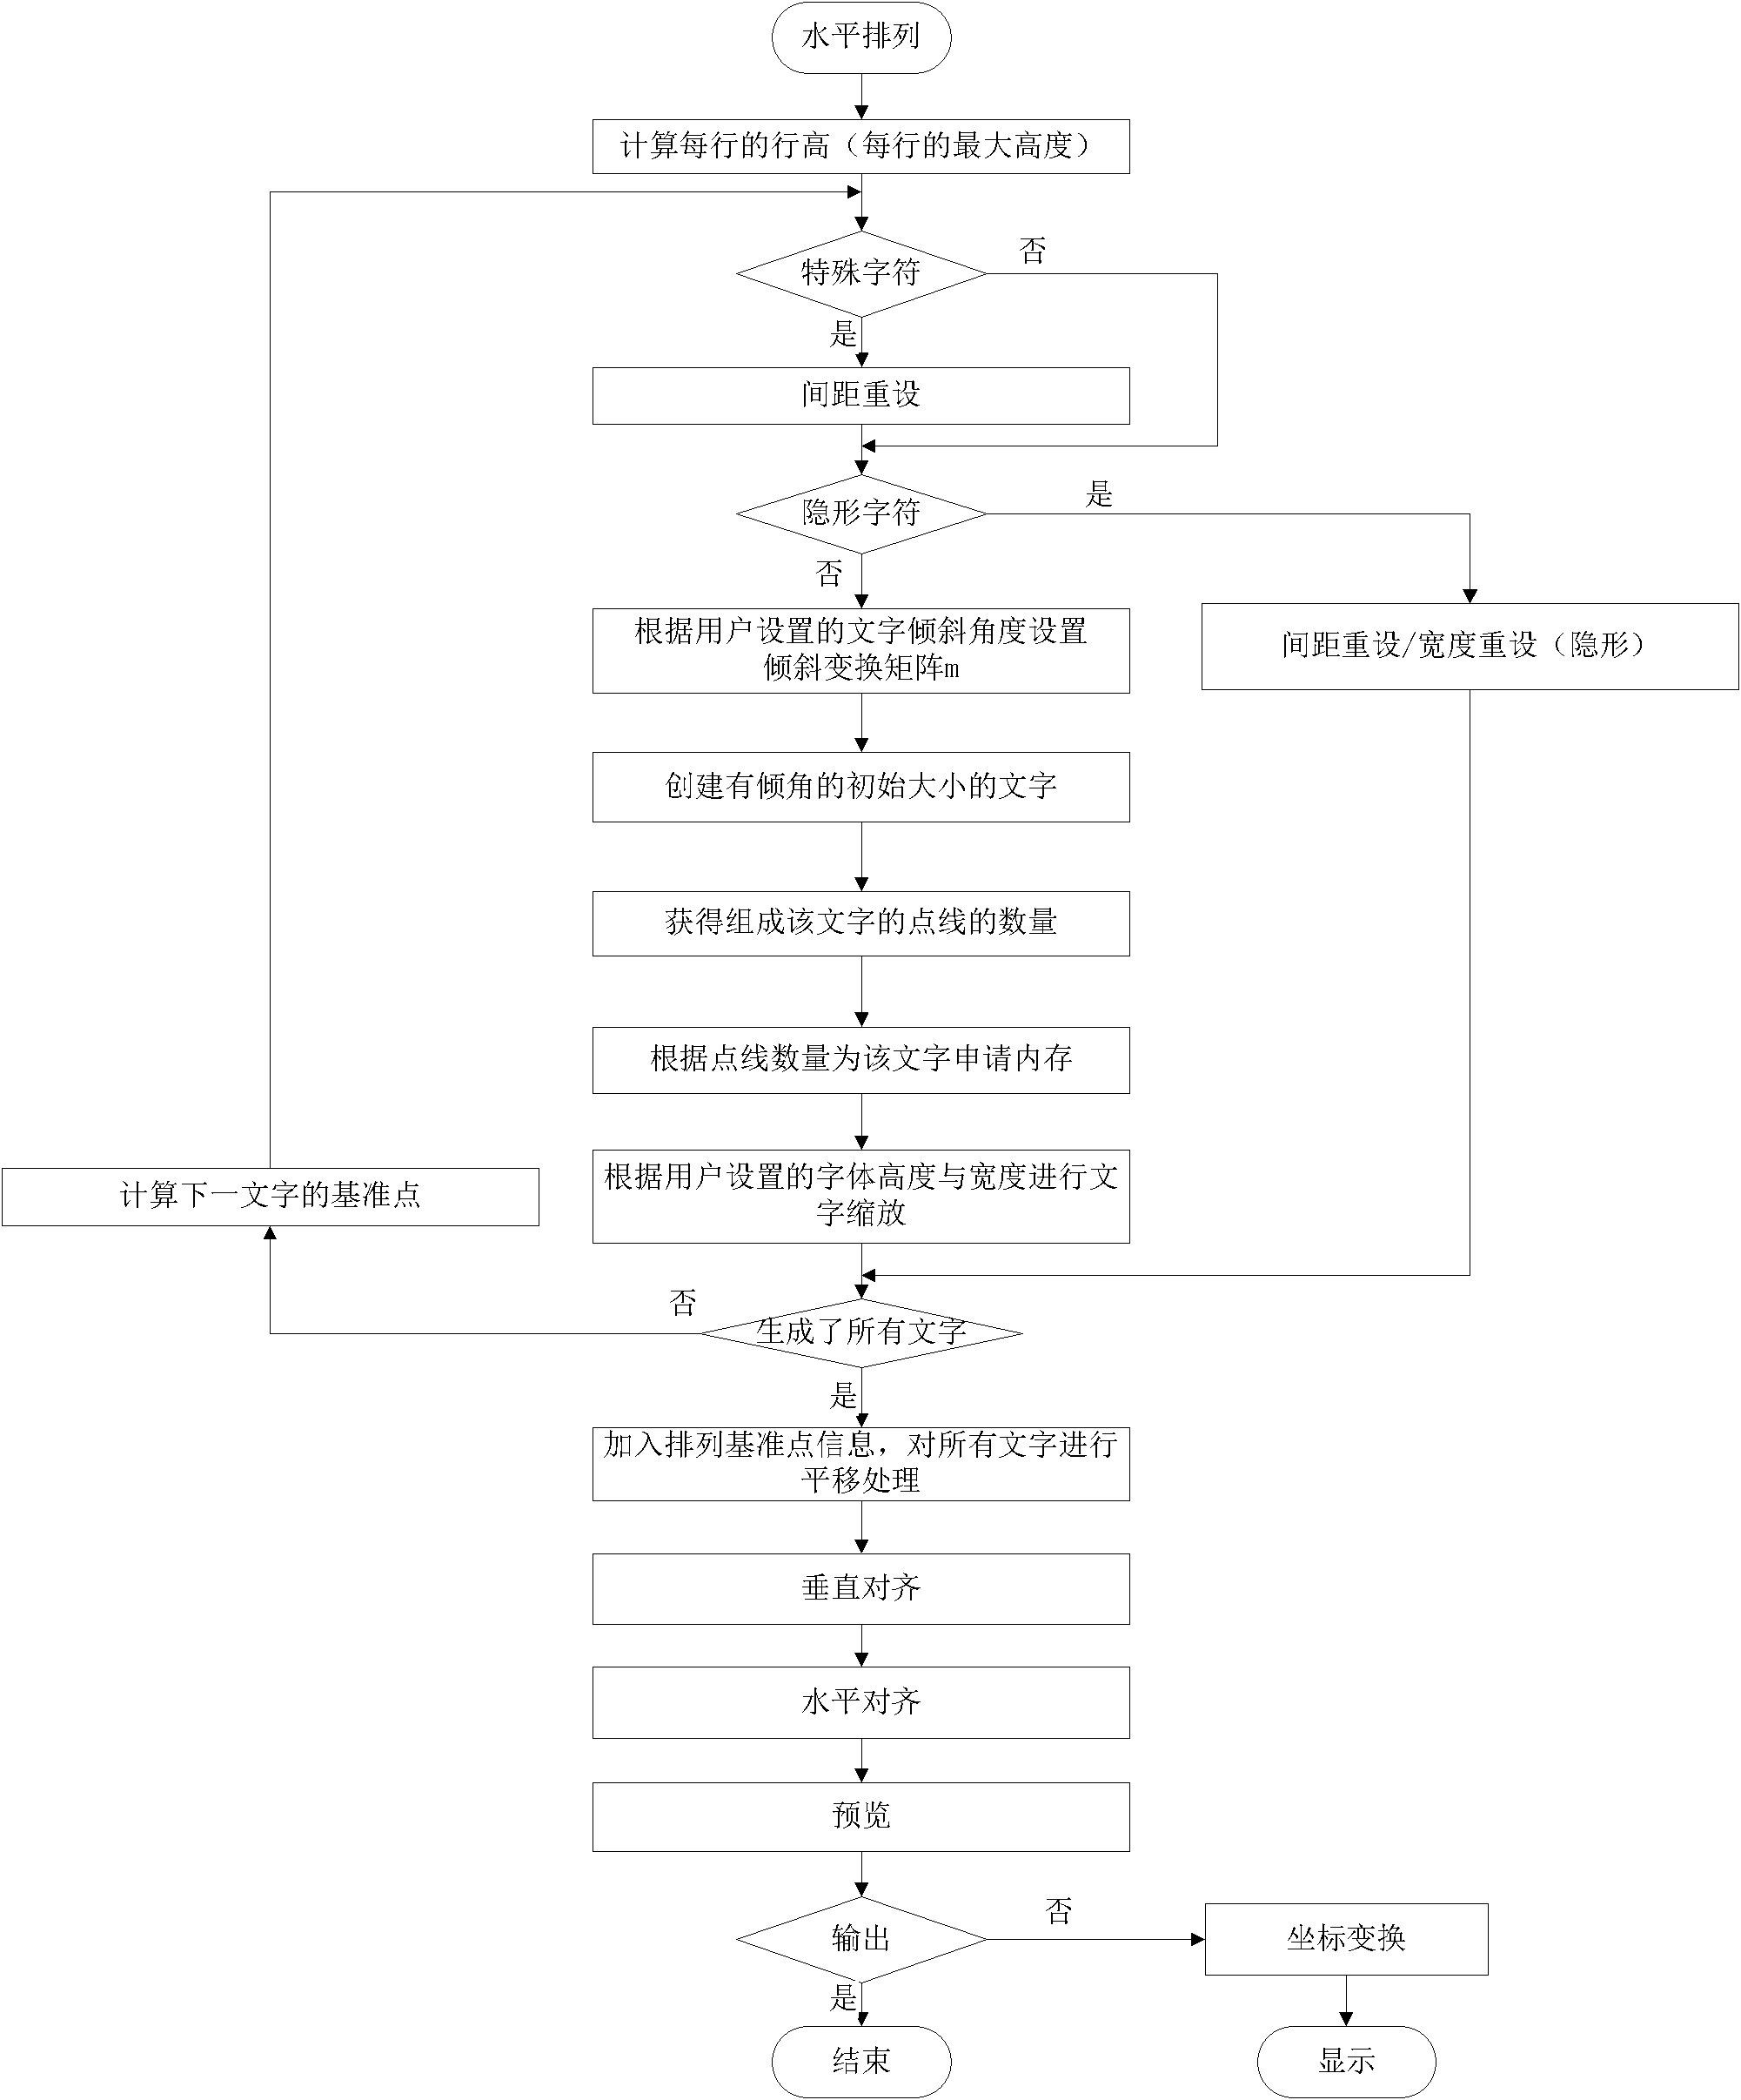 System and method for designing and processing characters for tire mold in three-dimensional CAD/CAM environment